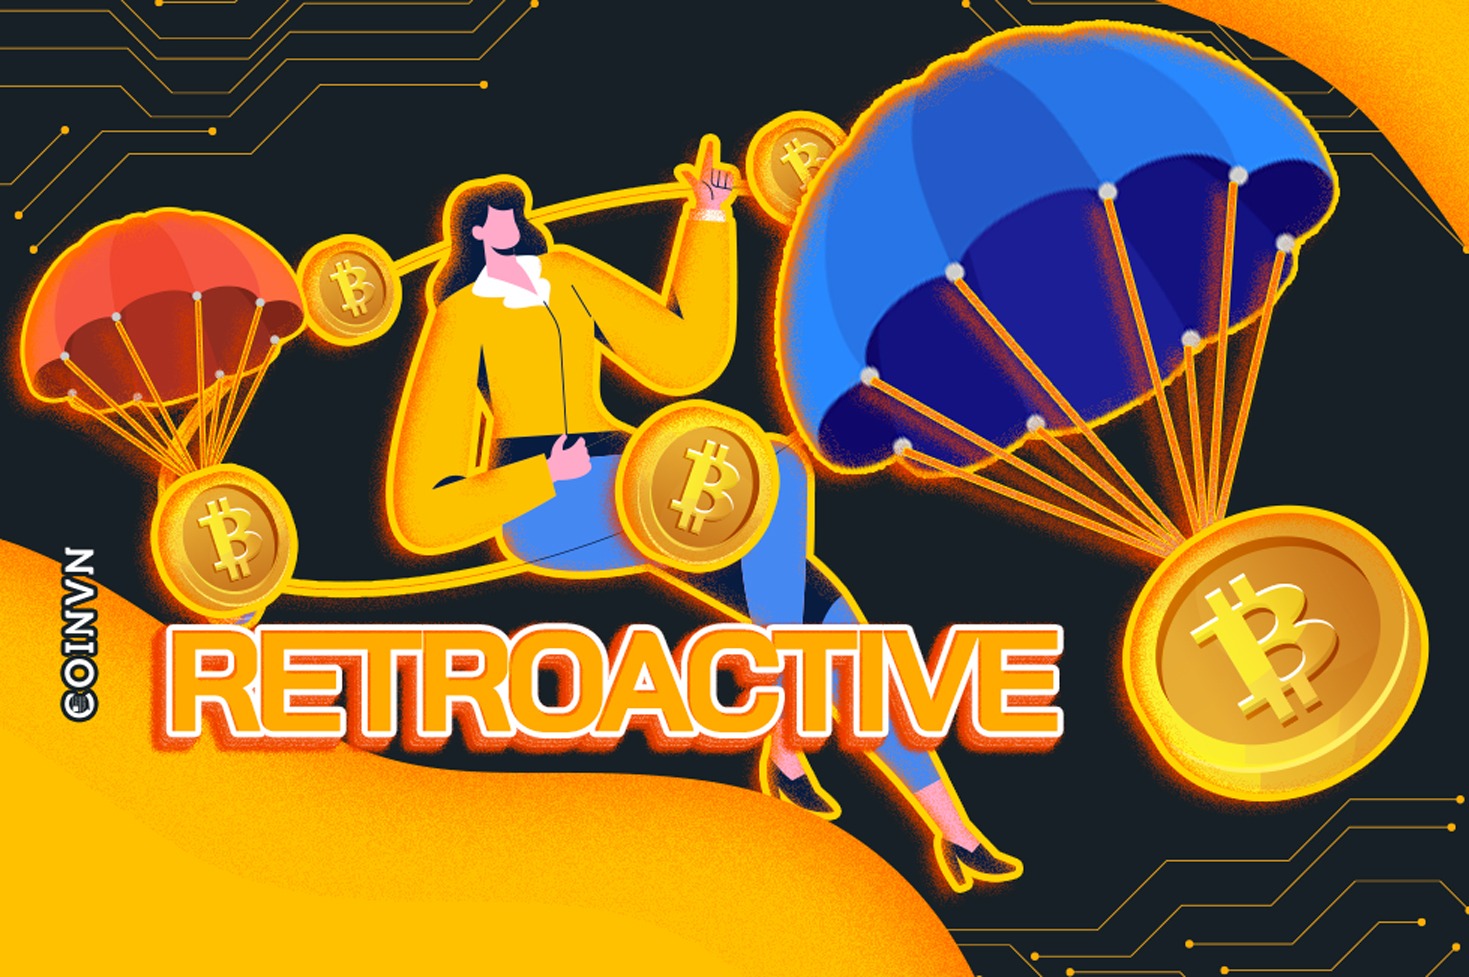 What is a retroactive airdrop